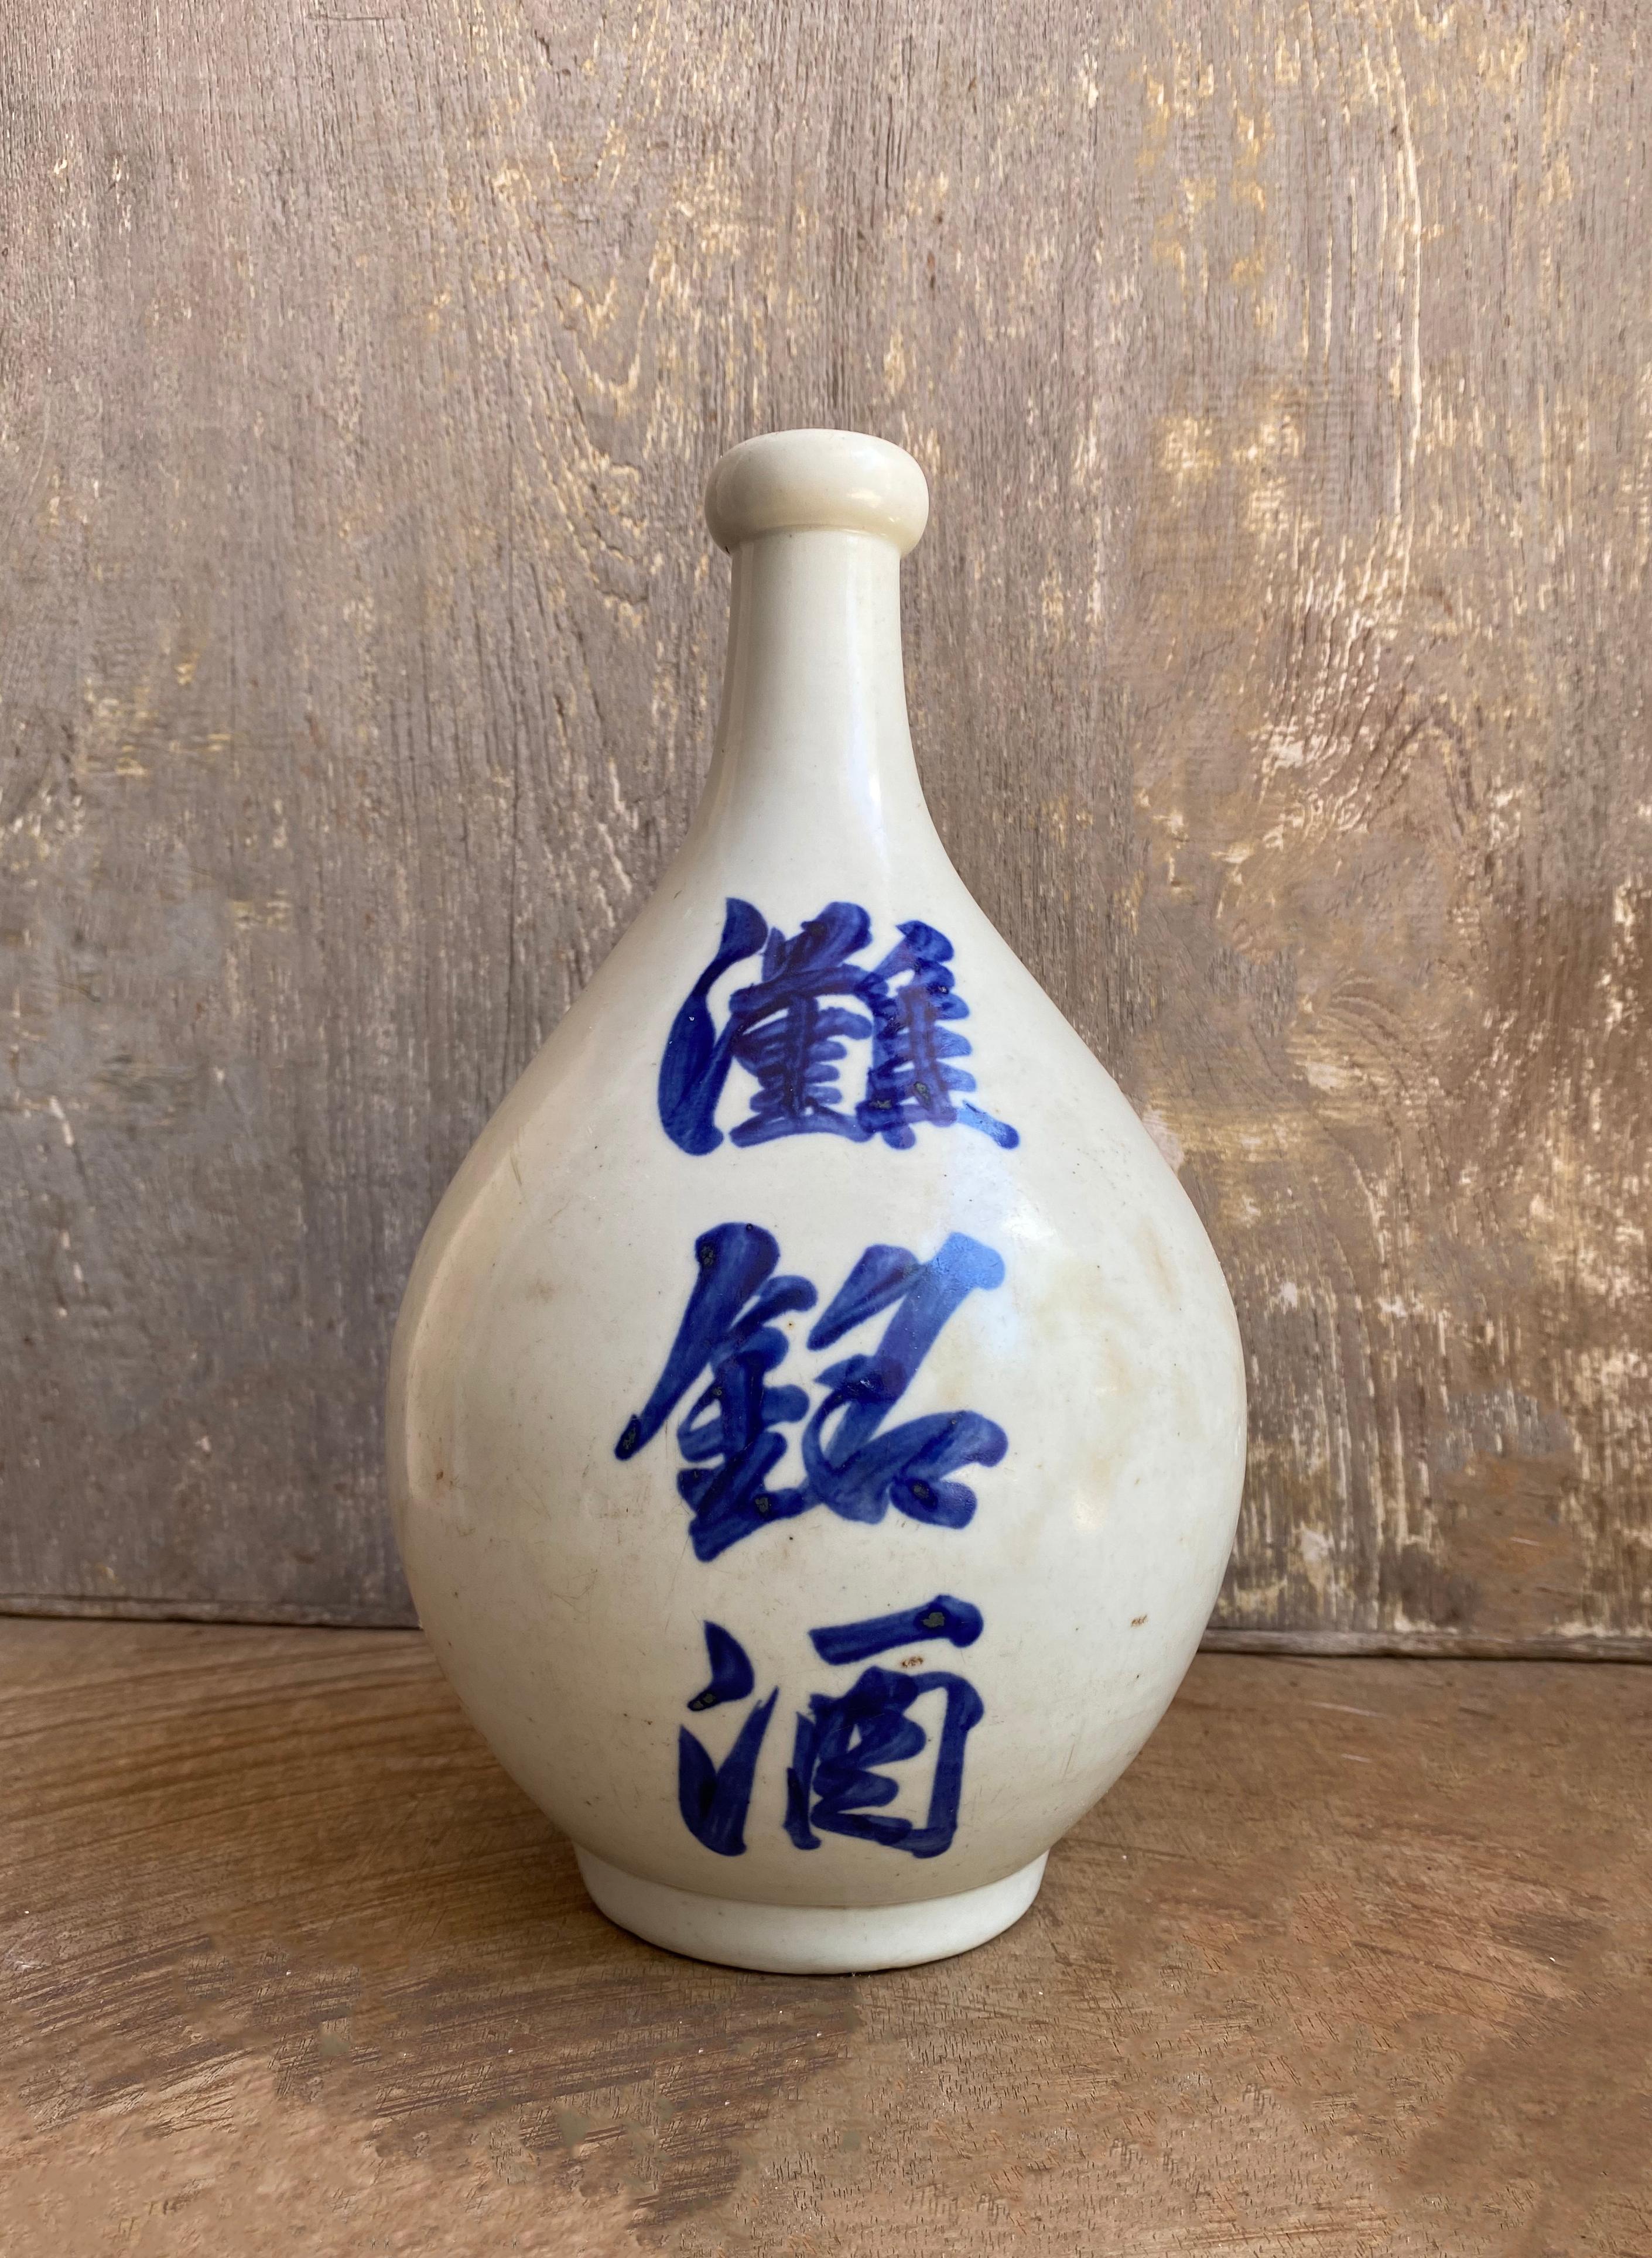 A Japanese ceramic Sake Jar from the early 20th century. The jar features glazed ceramic and hand-painted characters. 

Dimensions: Height 26cm x diameter 14.5cm.

 